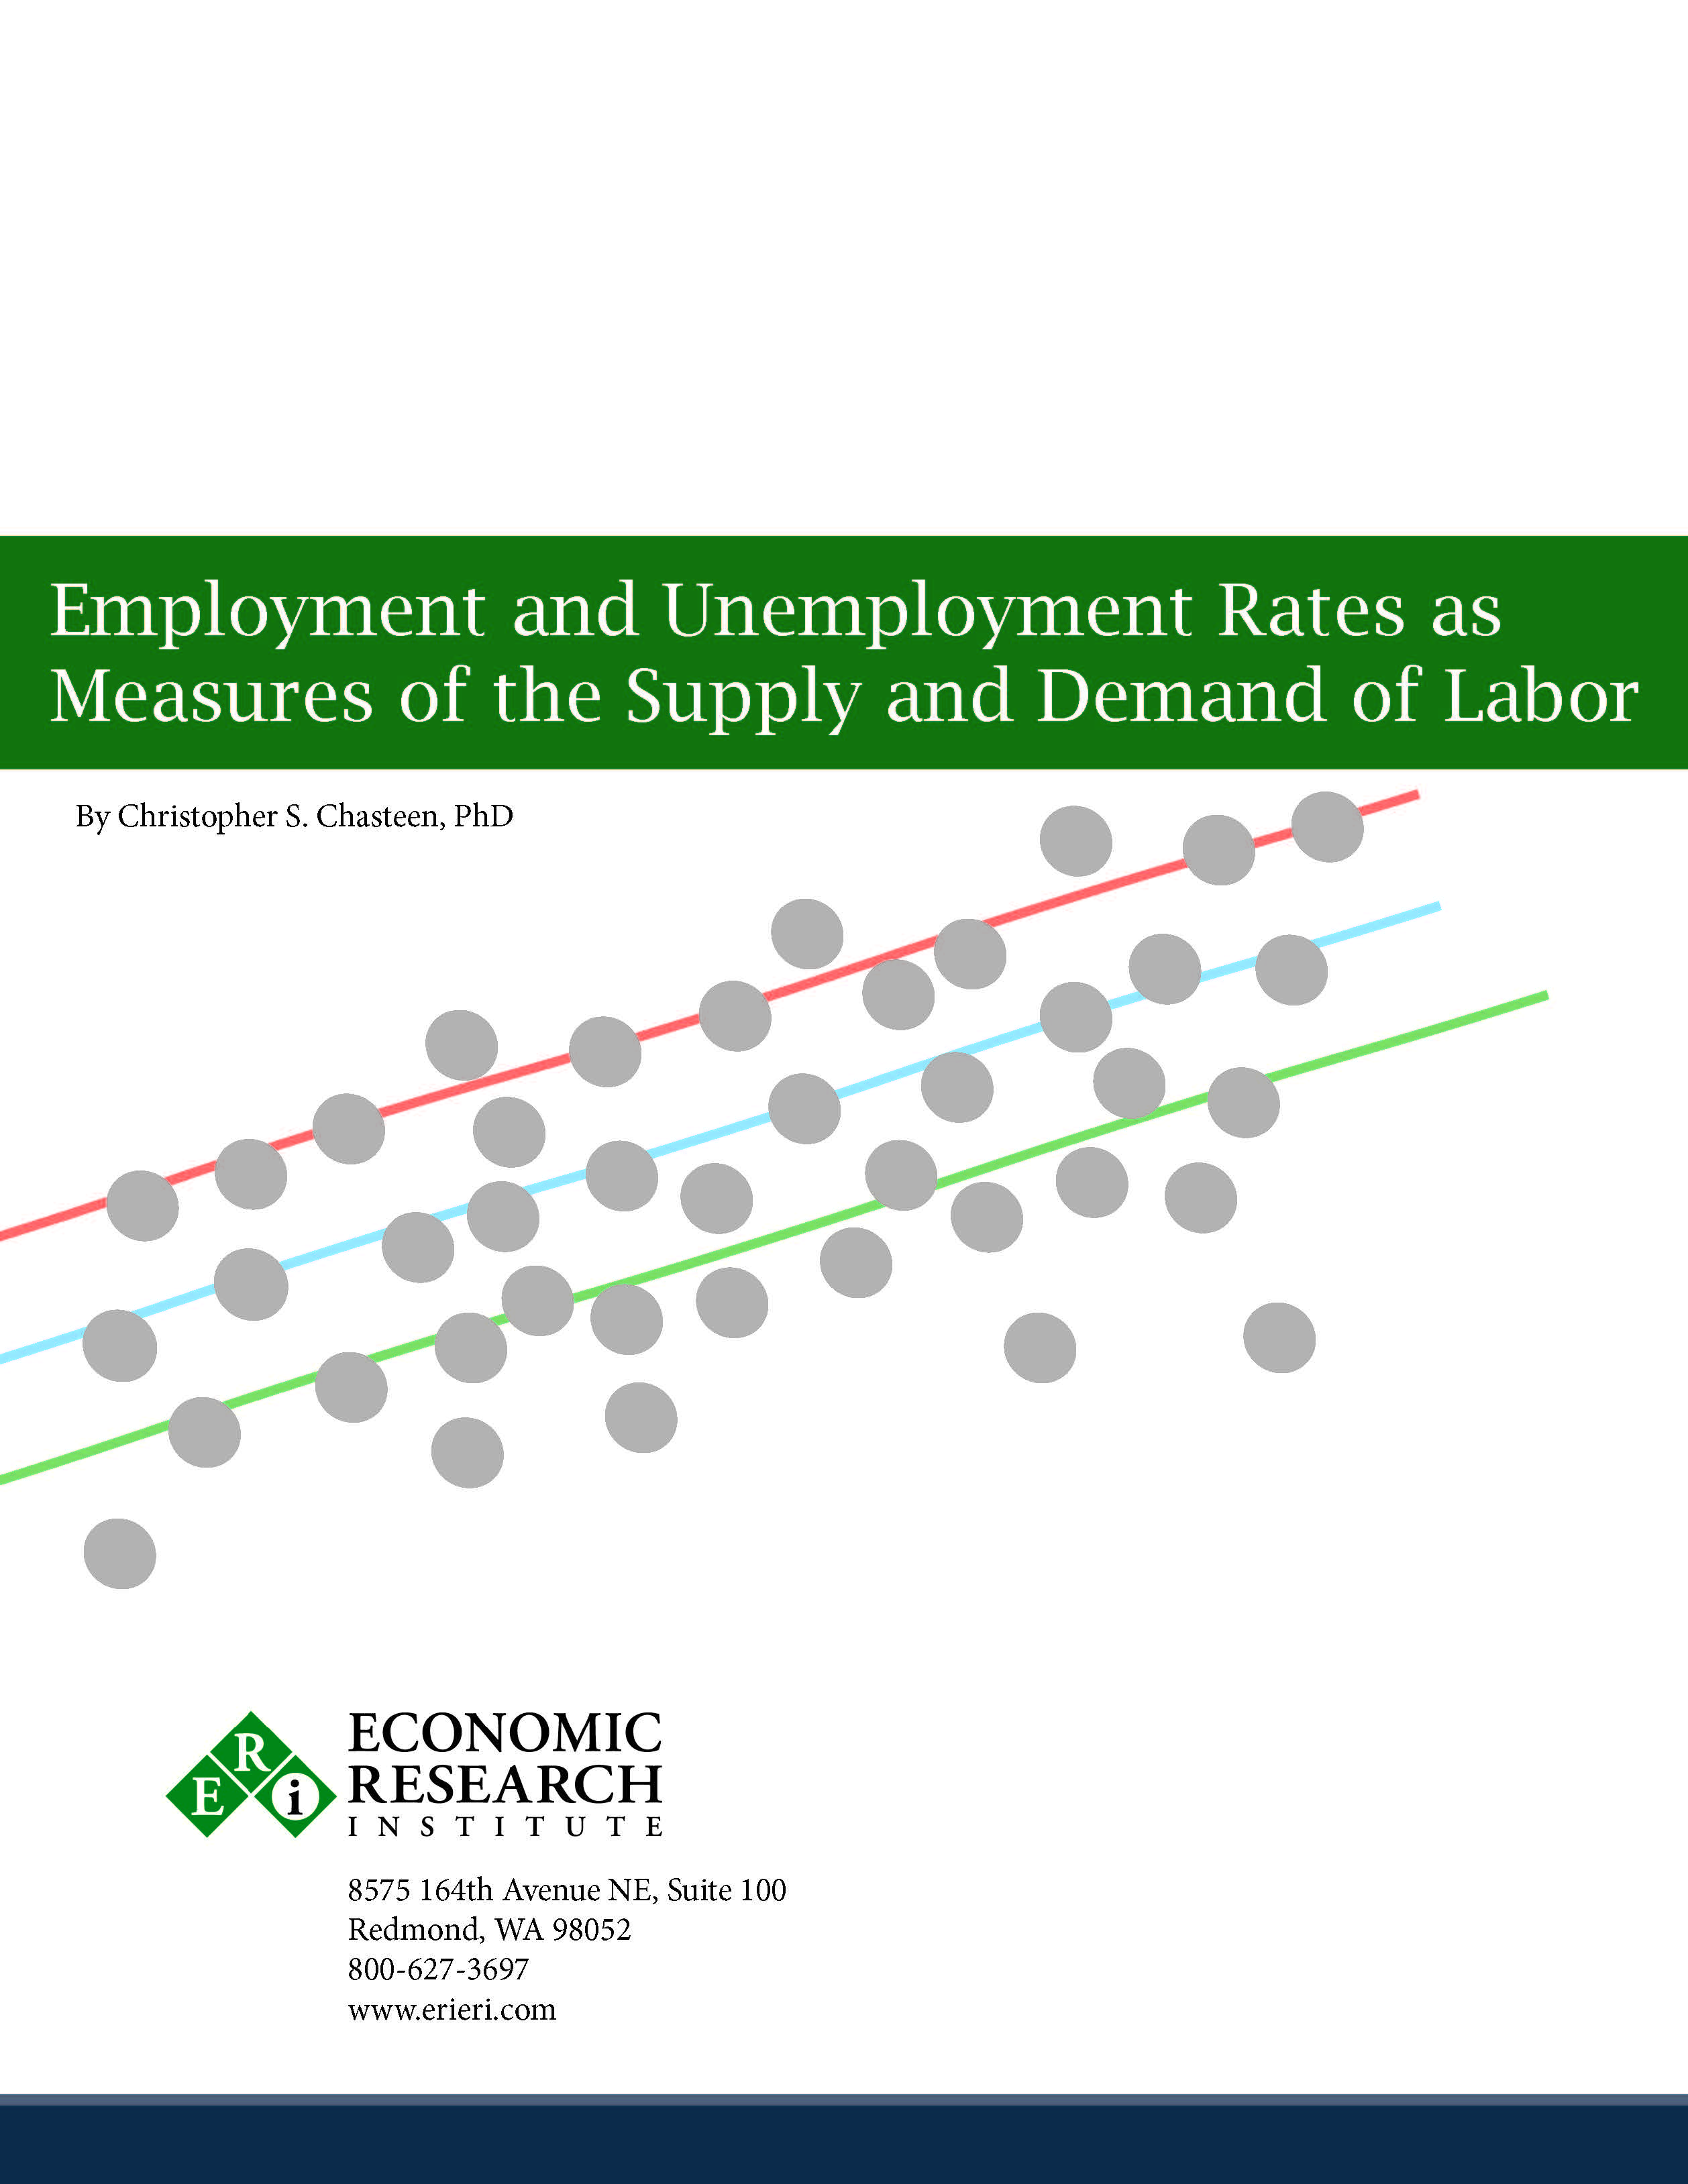 Employment_Unemployment_Rates_as_Measures_of_Supply_and_Demand_of_Labor_Page_1